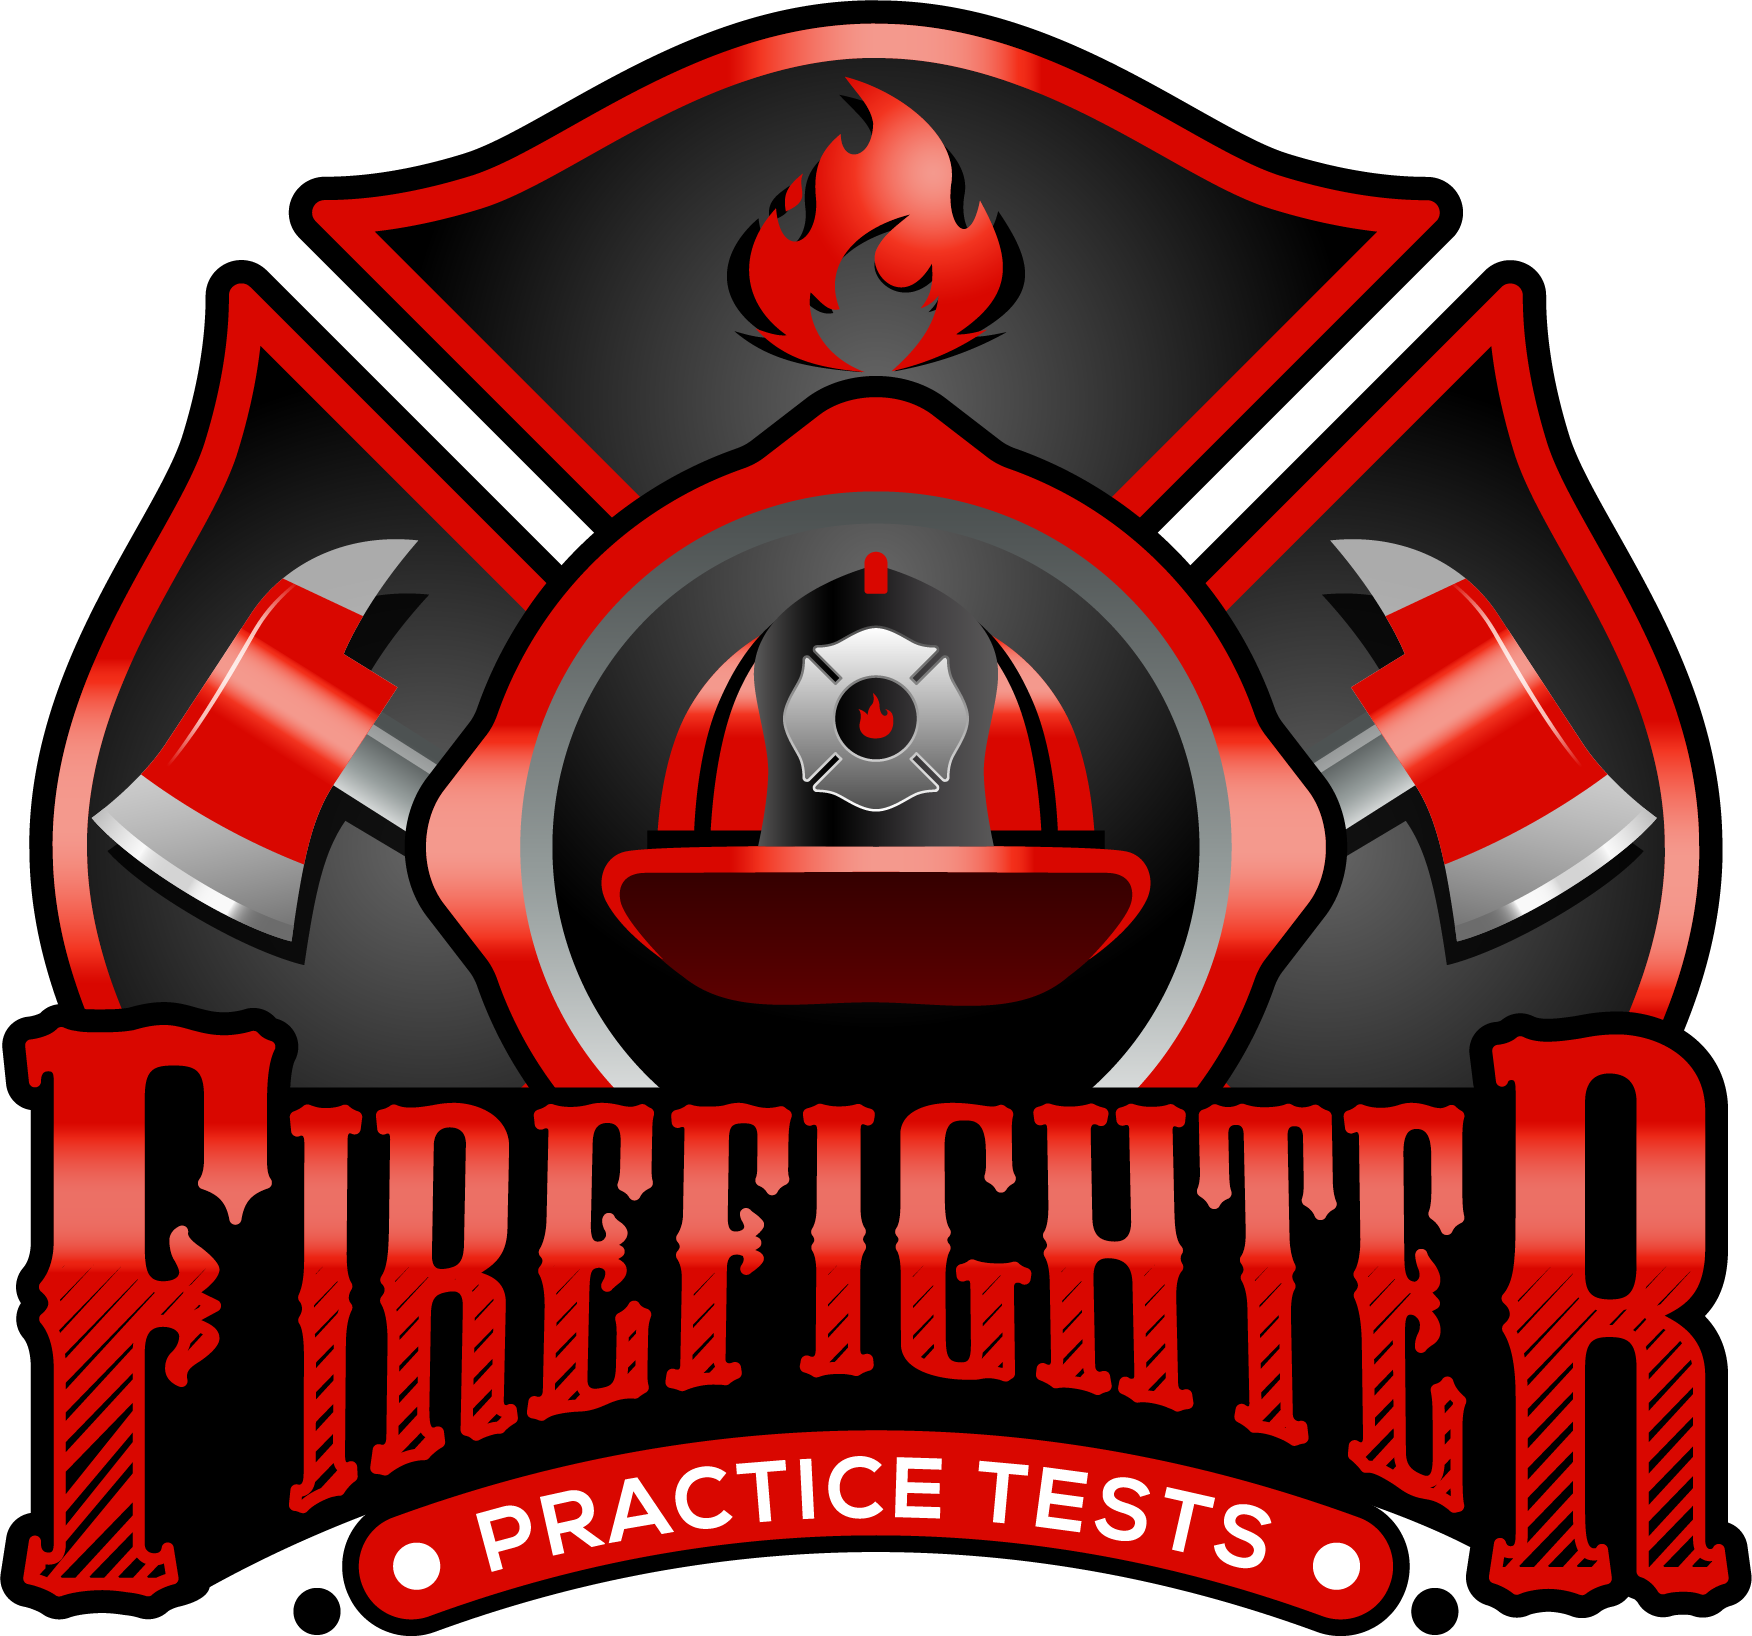 Firefighter Practice Tests